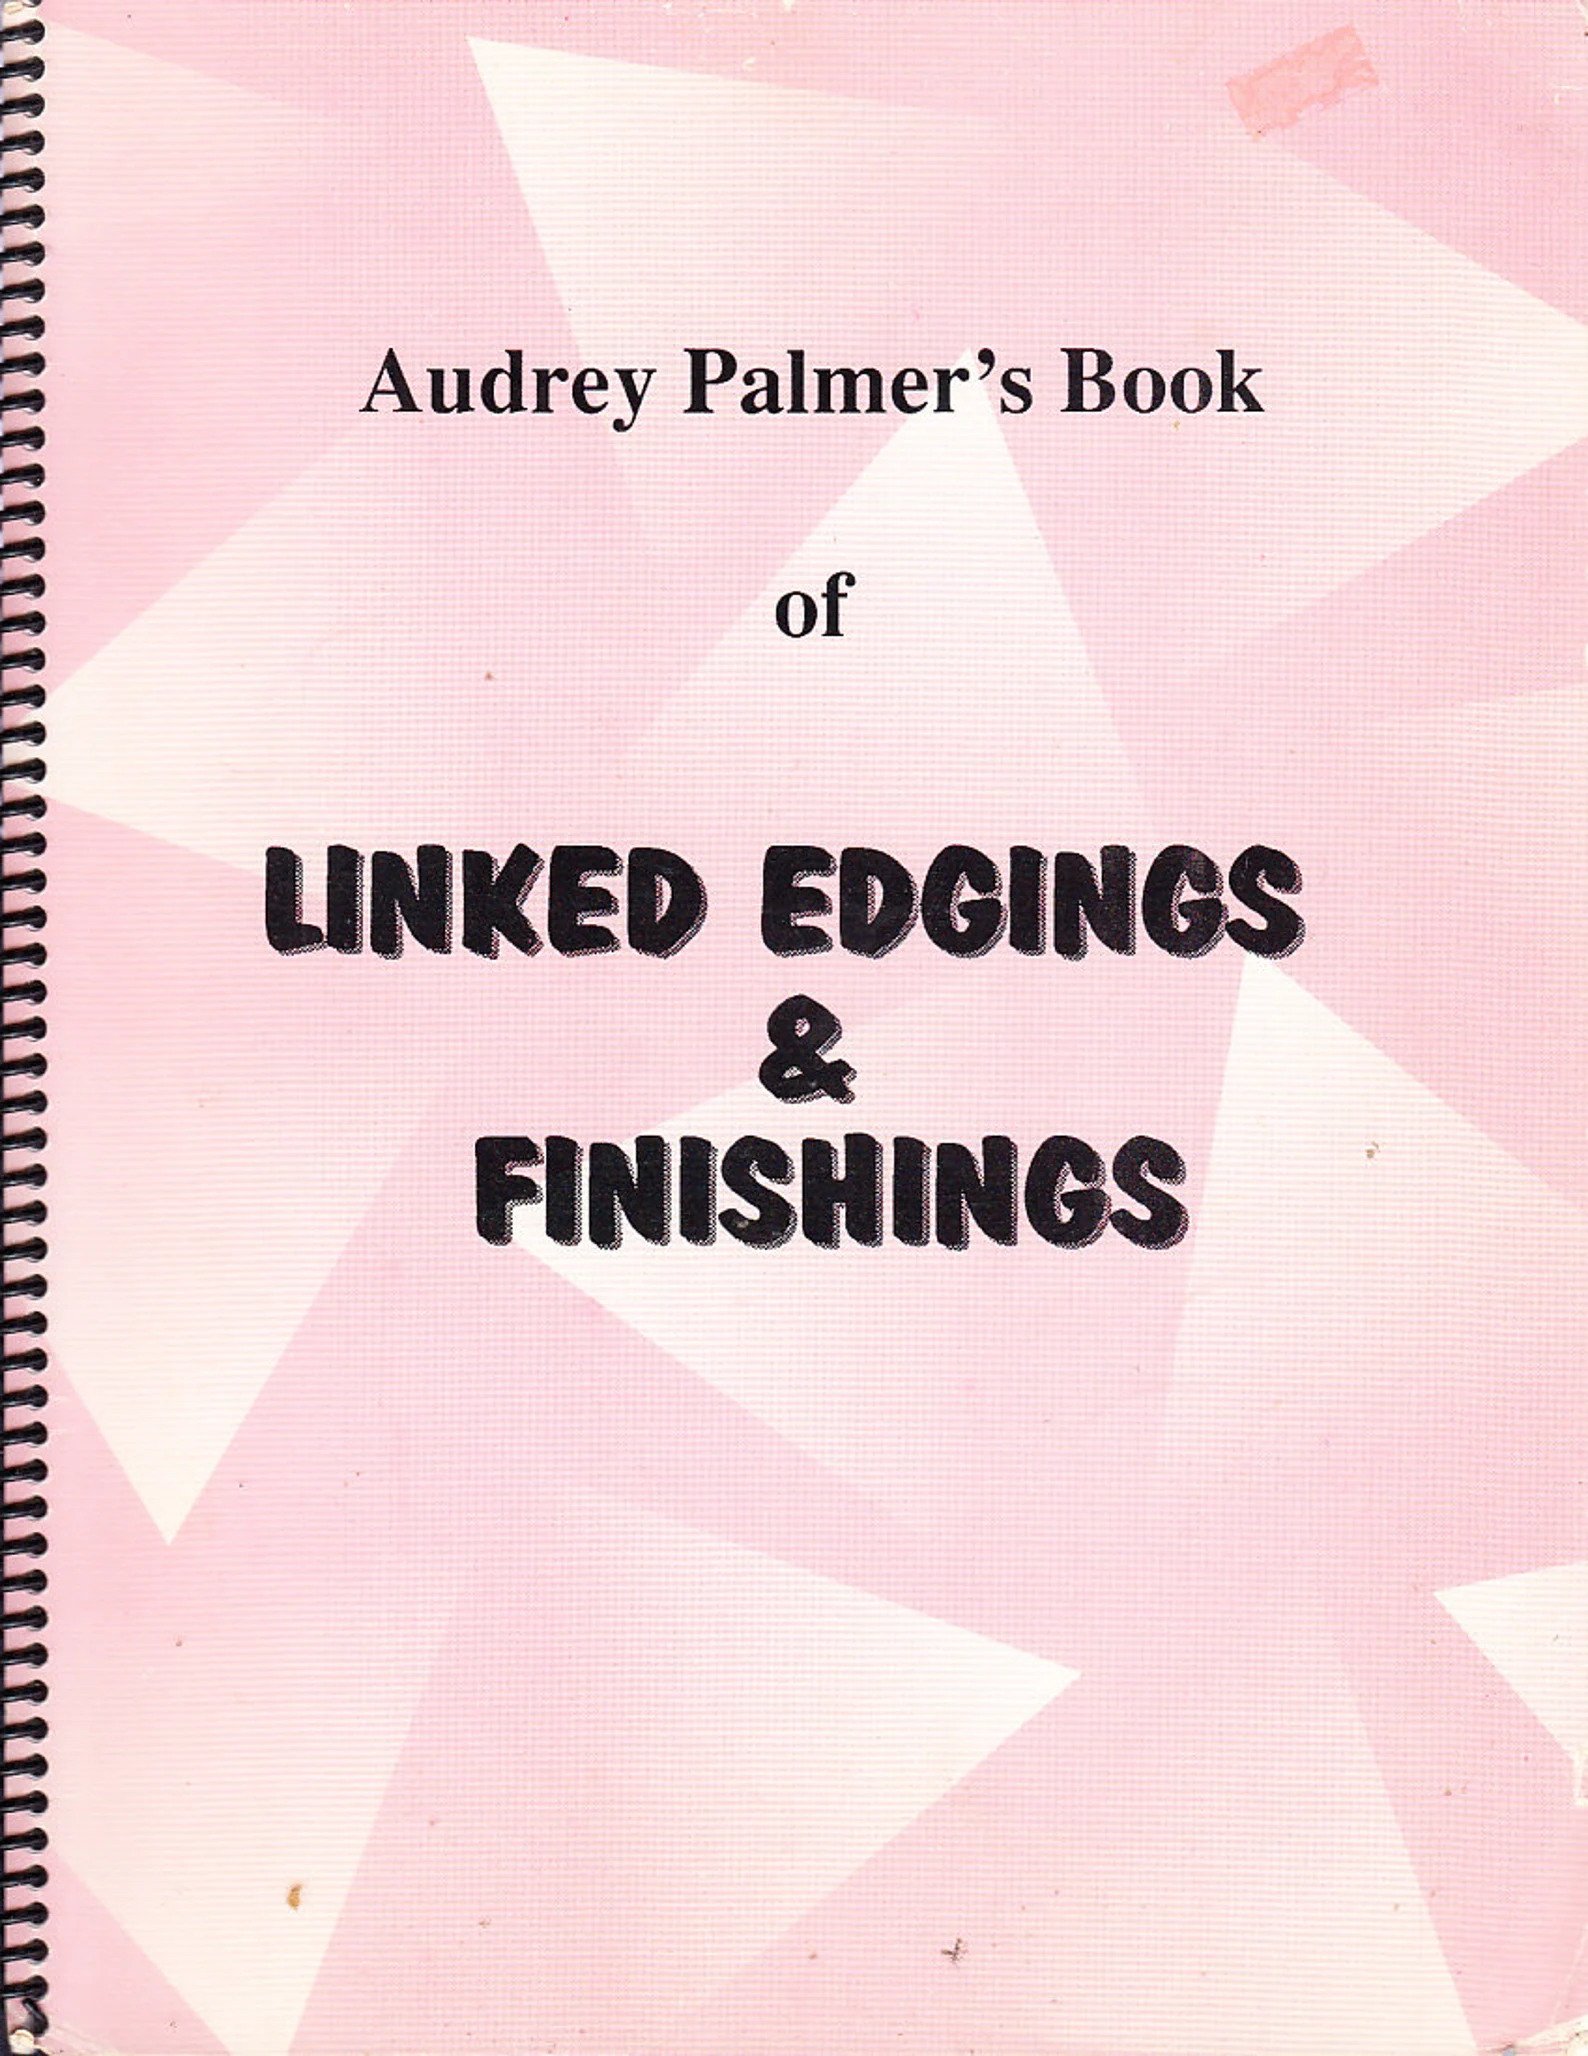 Book of Linked Edgings and Finishing